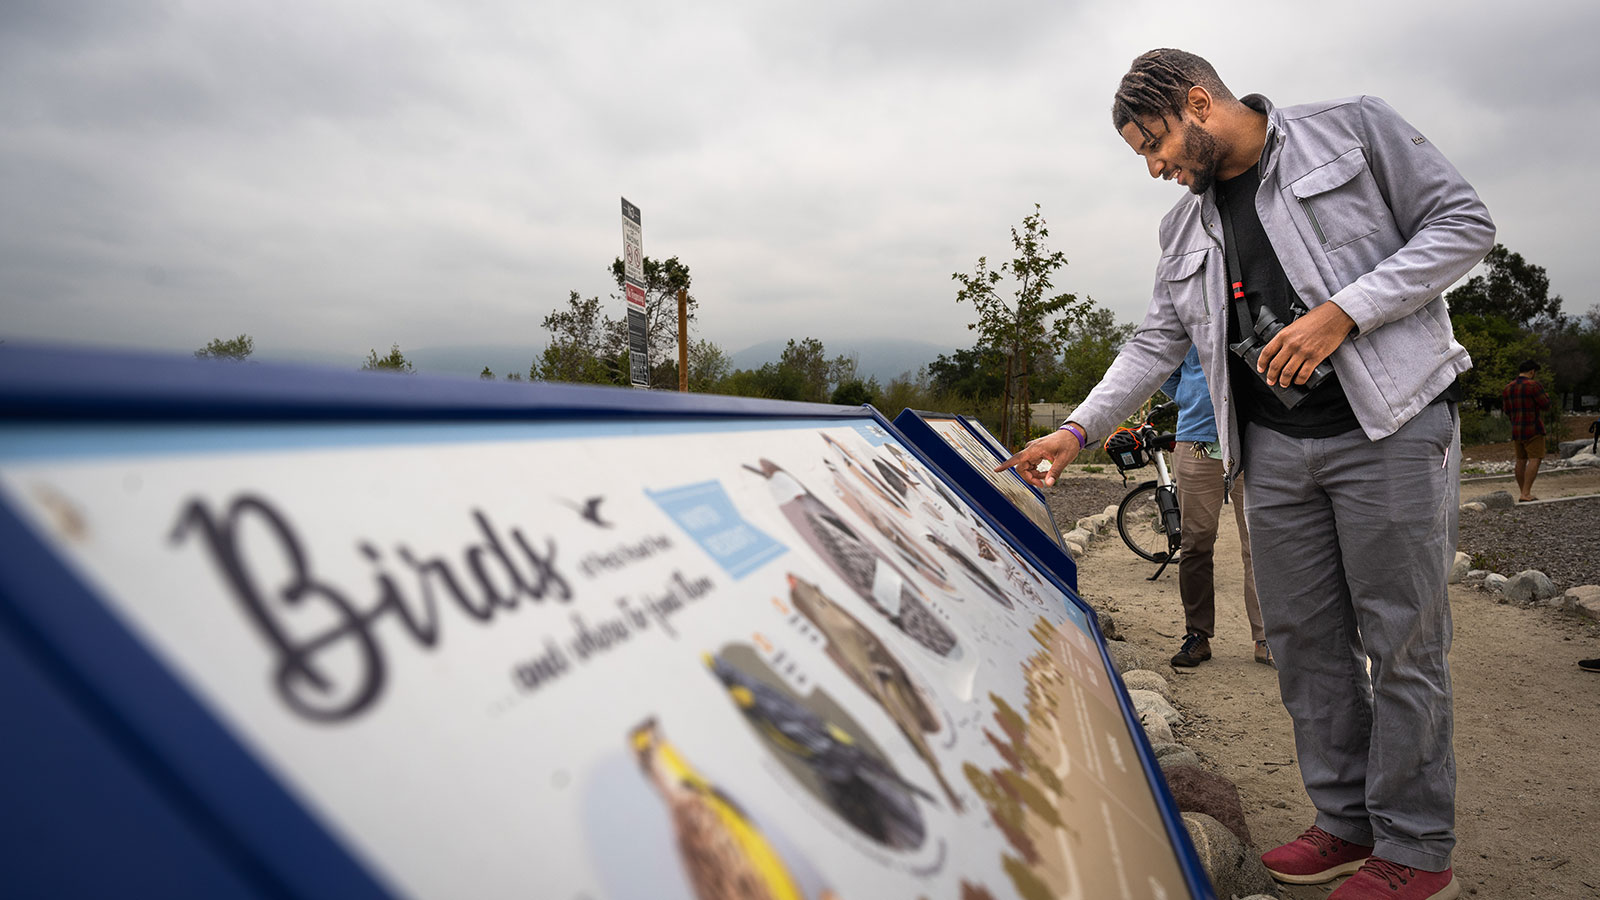 A man with binoculars studies a sign with information about local birds